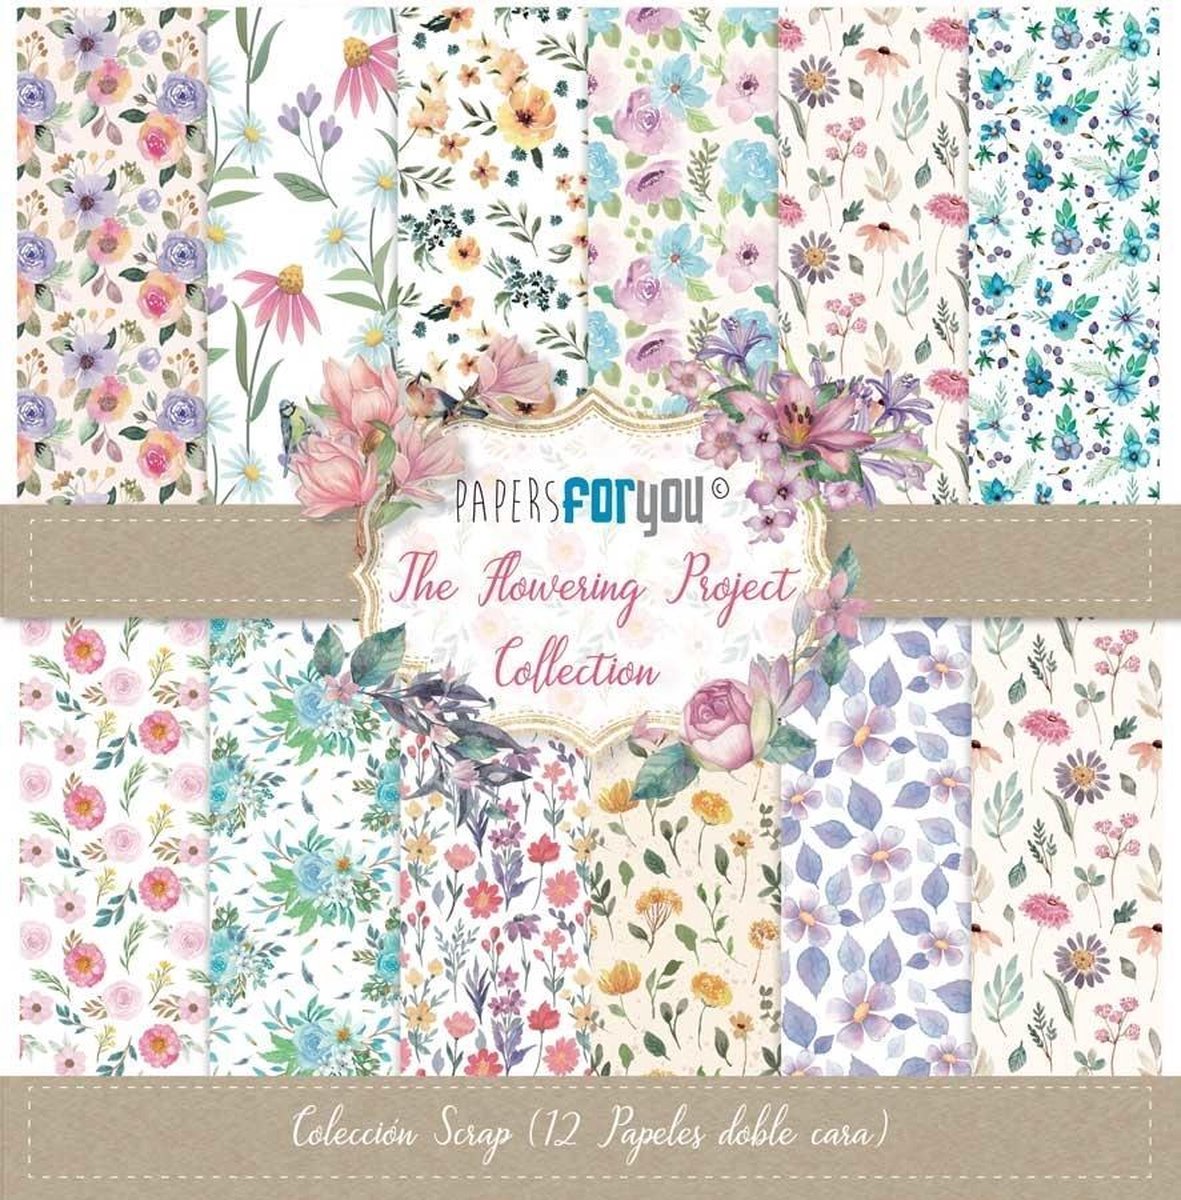 The Flowering Project 12x12 Inch Paper Pack (12pcs) (PFY-3098)